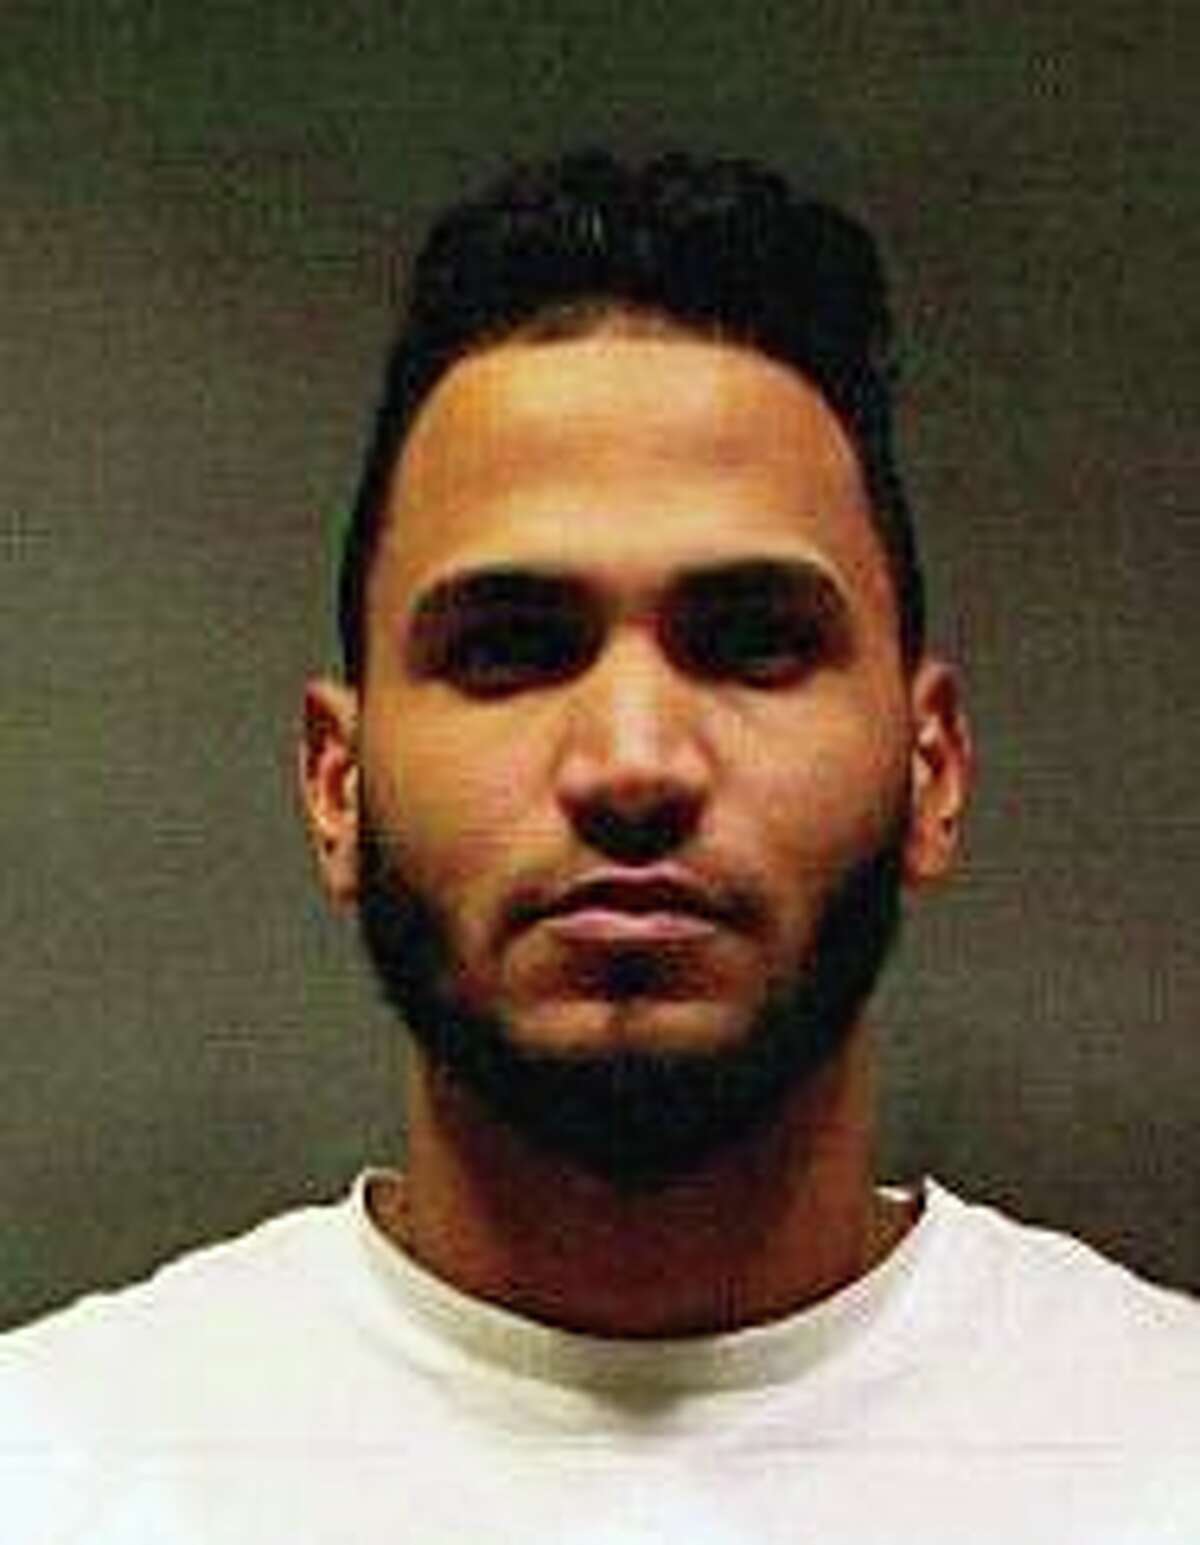 Jonathan Matos, 28, was charged by Stratford police on Jan. 7, 2020.